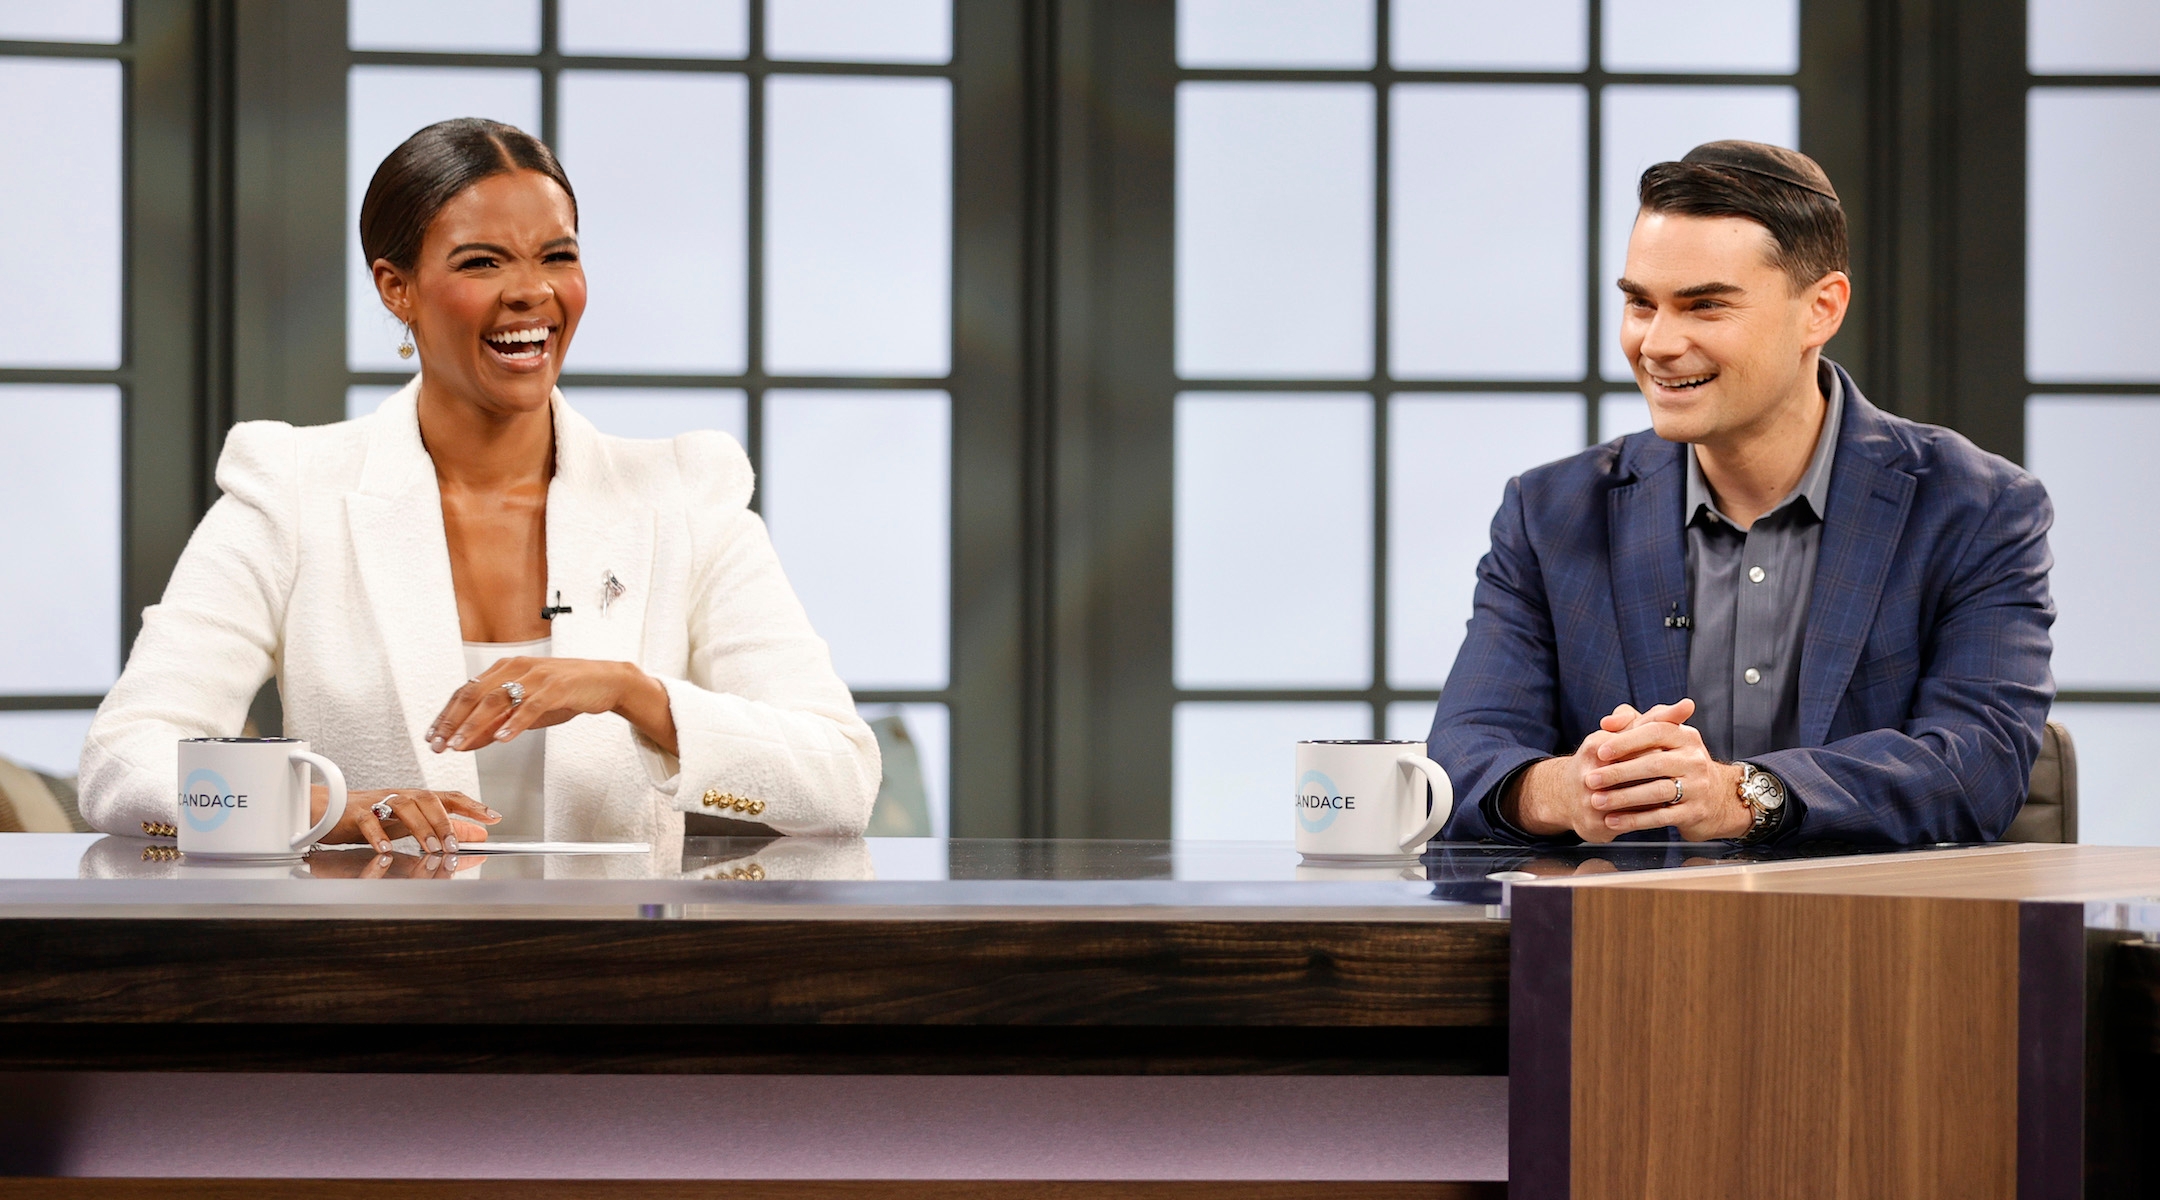 Political commentators Candace Owens and Ben Shapiro are seen on set during a taping of “Candace” on March 17, 2021 in Nashville, Tennessee. (Jason Kempin/Getty Images)